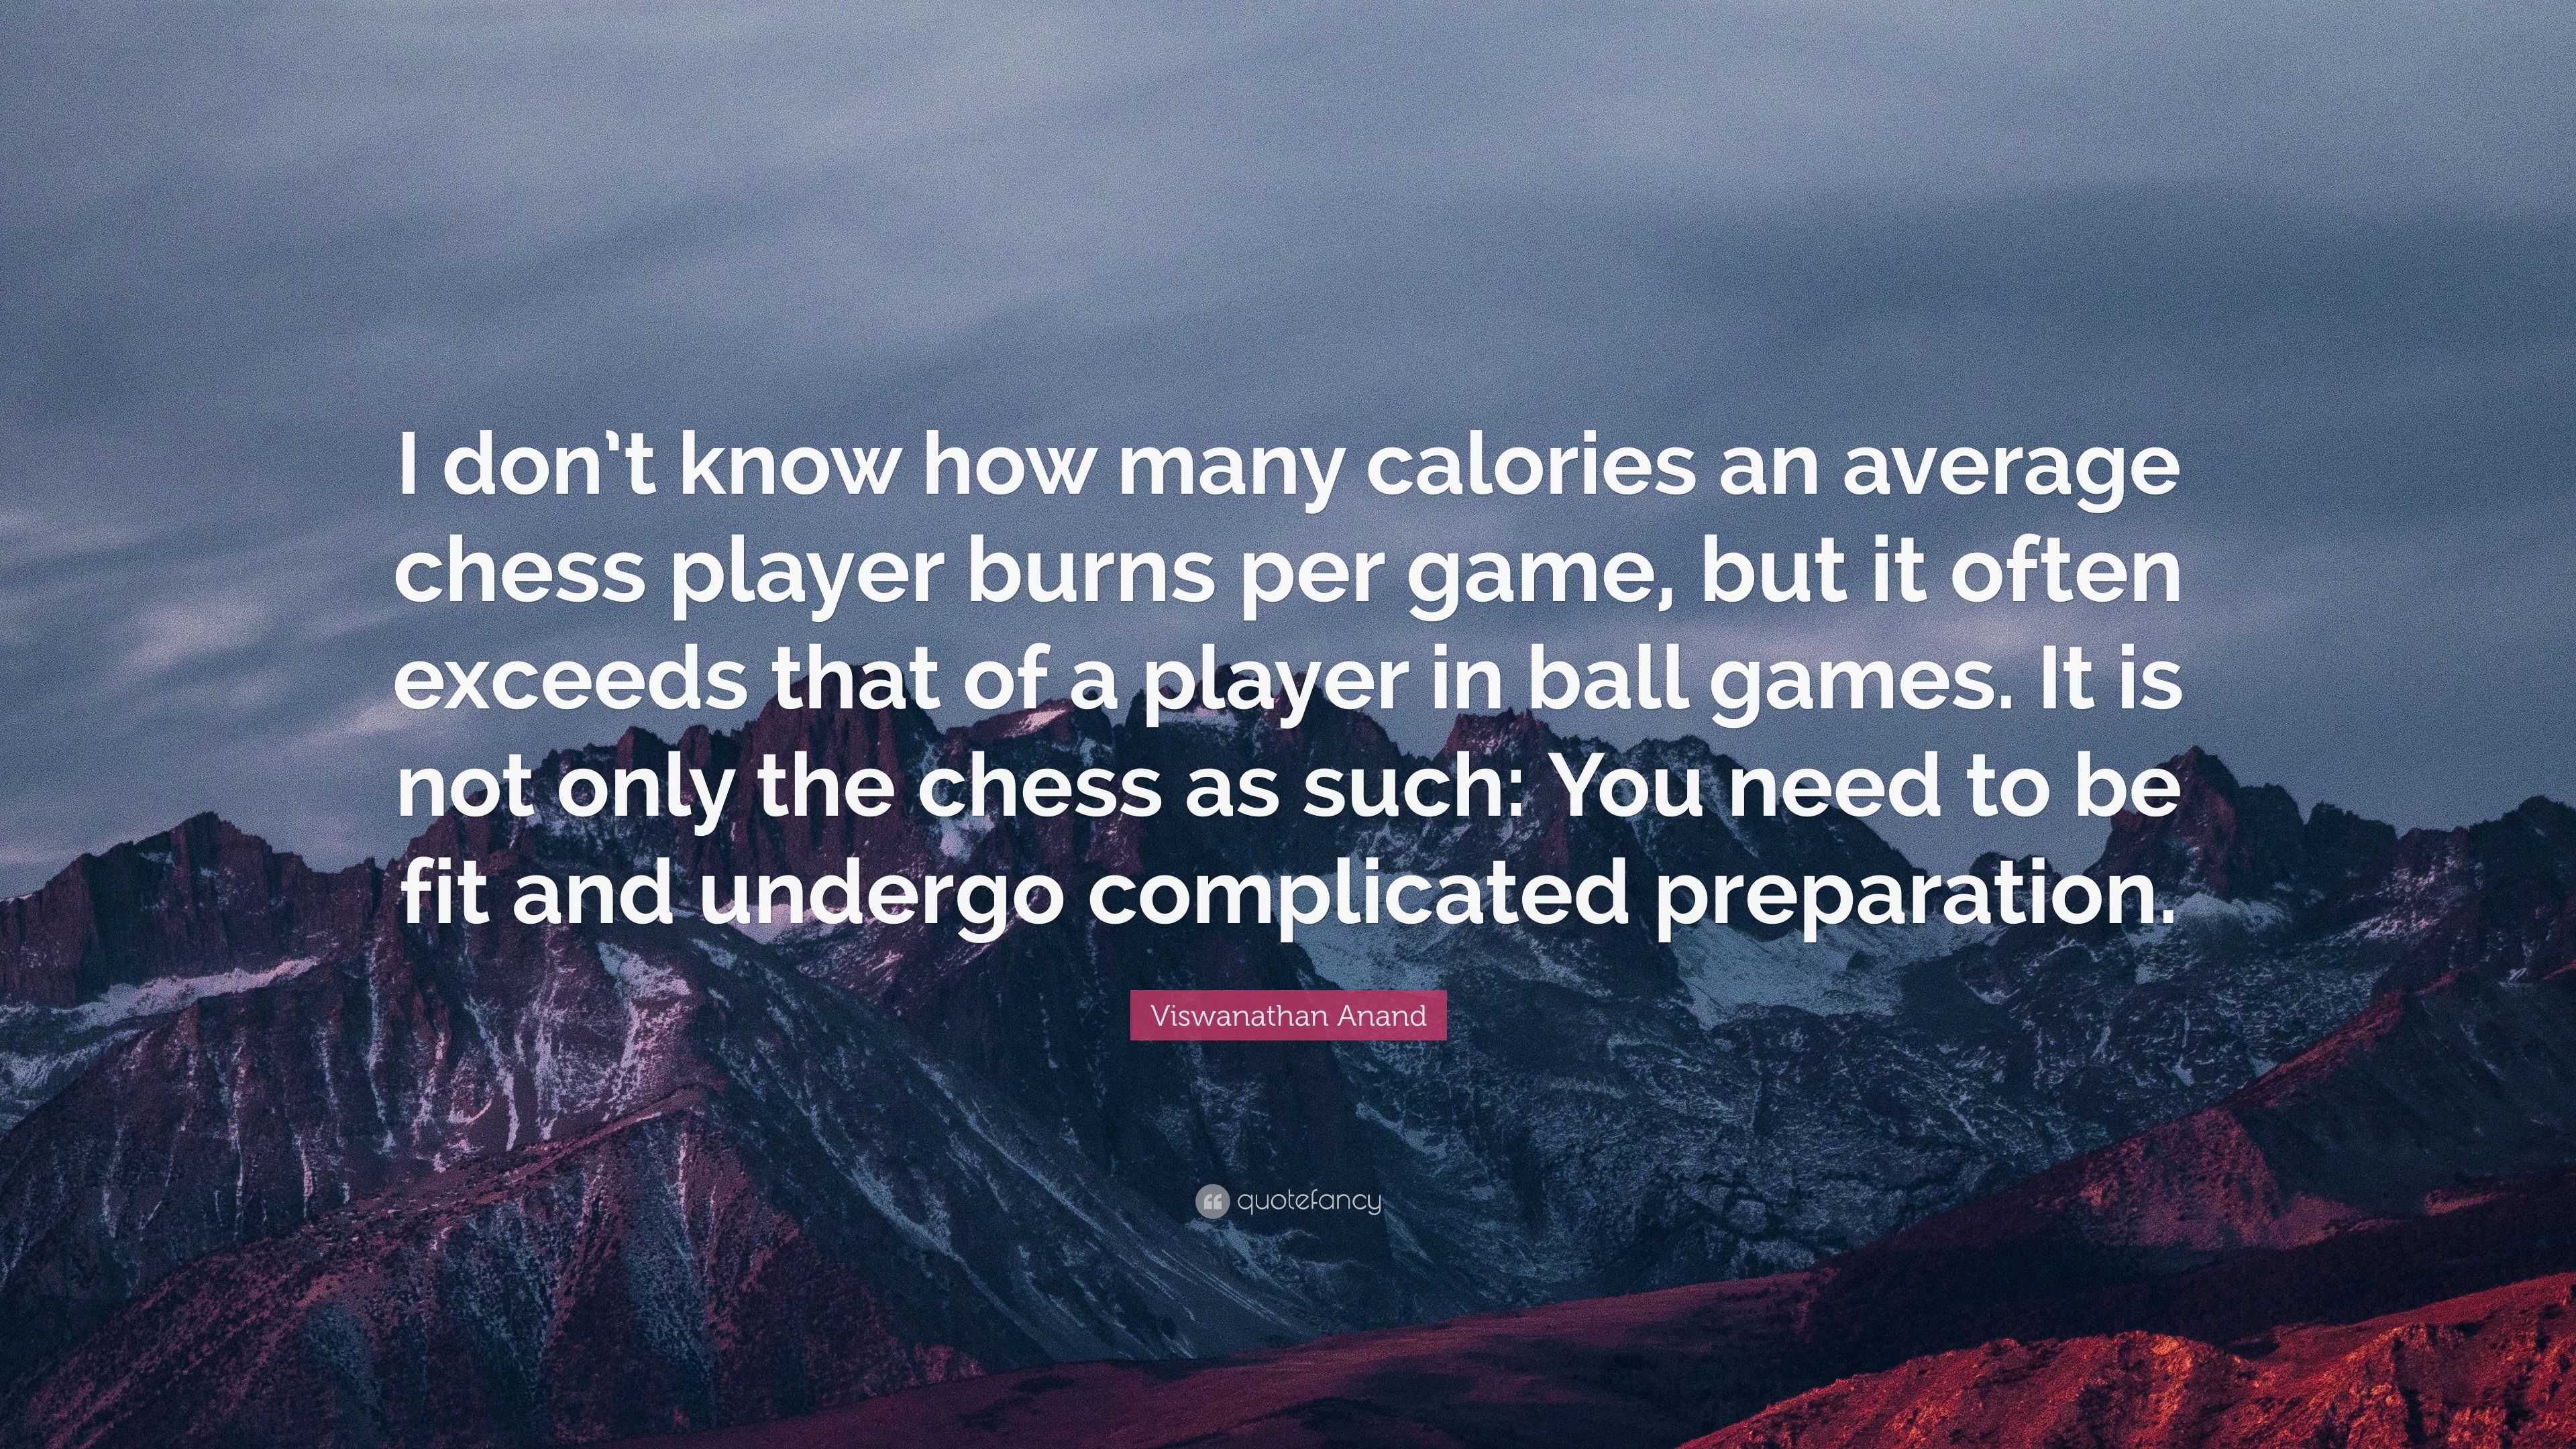 Viswanathan Anand Quote: “I don't know how many calories an average chess  player burns per game, but it often exceeds that of a player in ball gam”